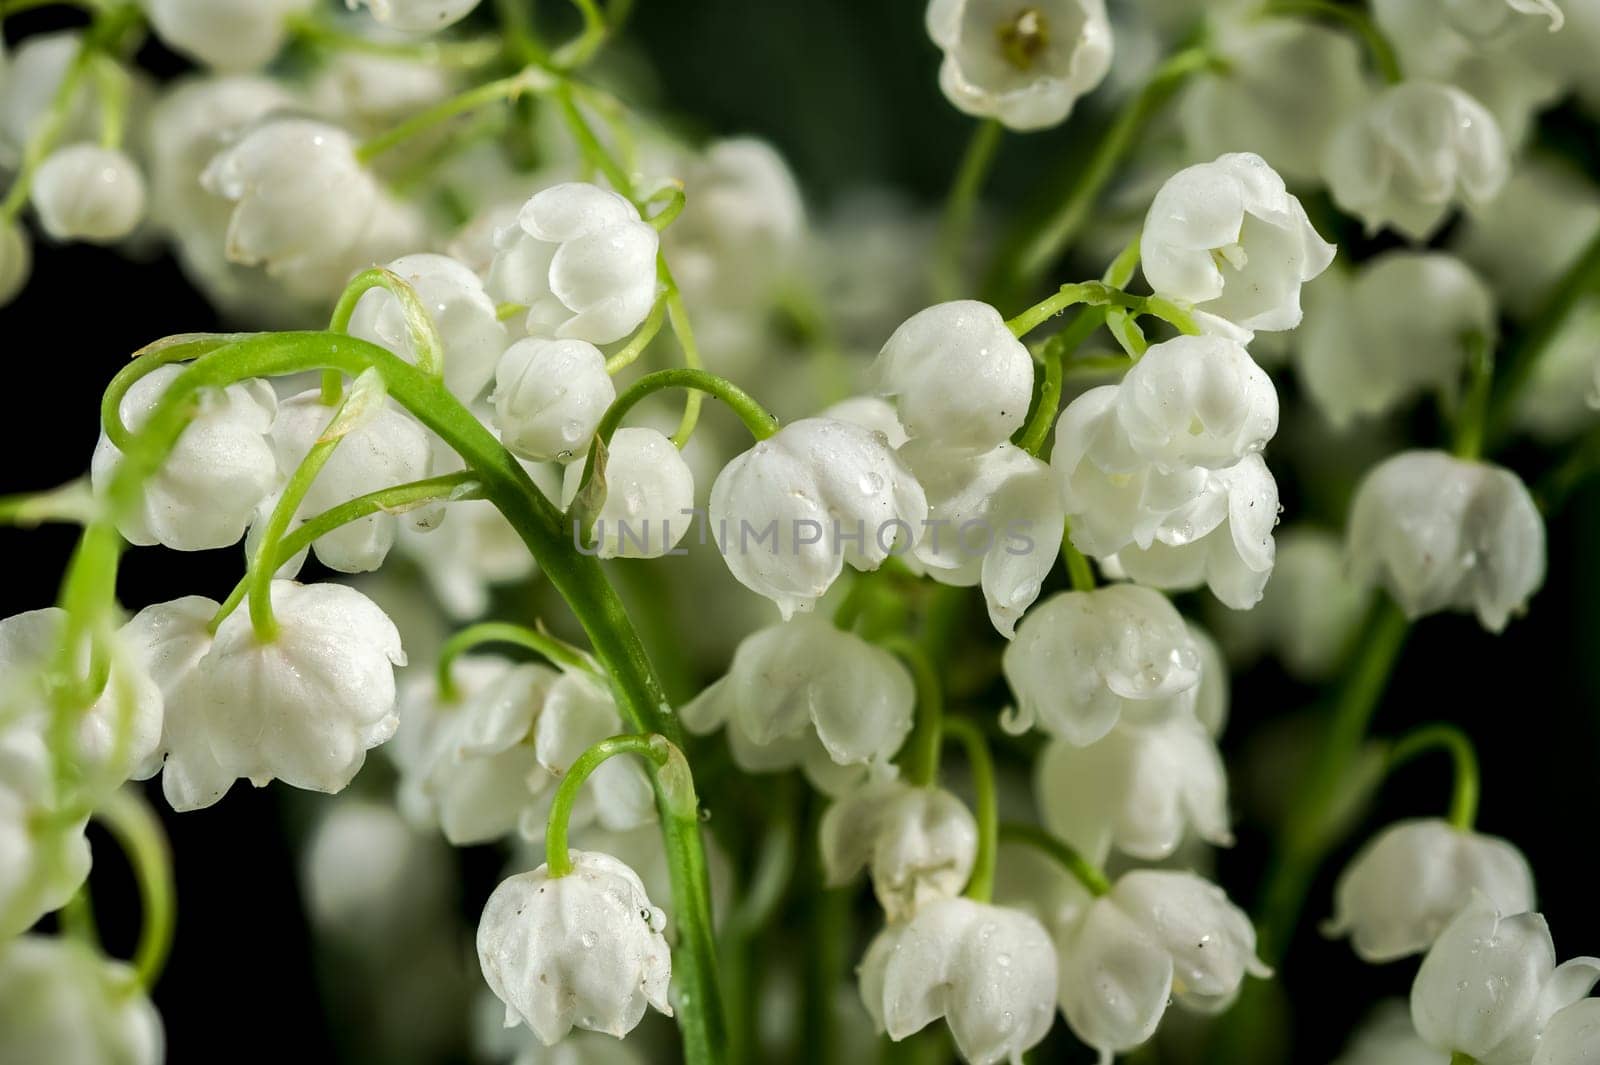 Blooming Lily of the valley flowers on a black background by Multipedia